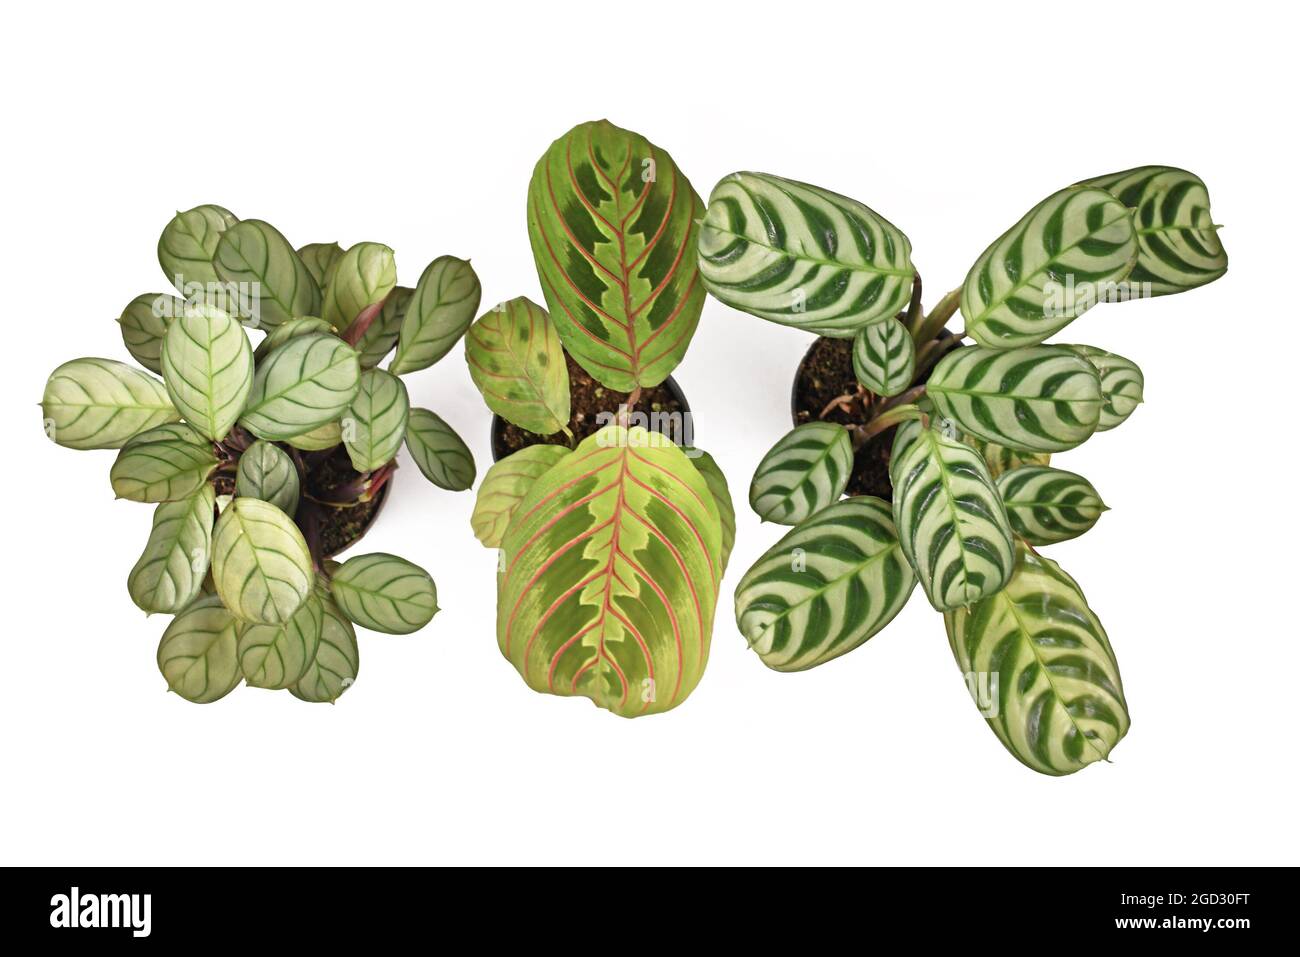 Top view of three small exotic Prayer Plant houseplants on white background Stock Photo